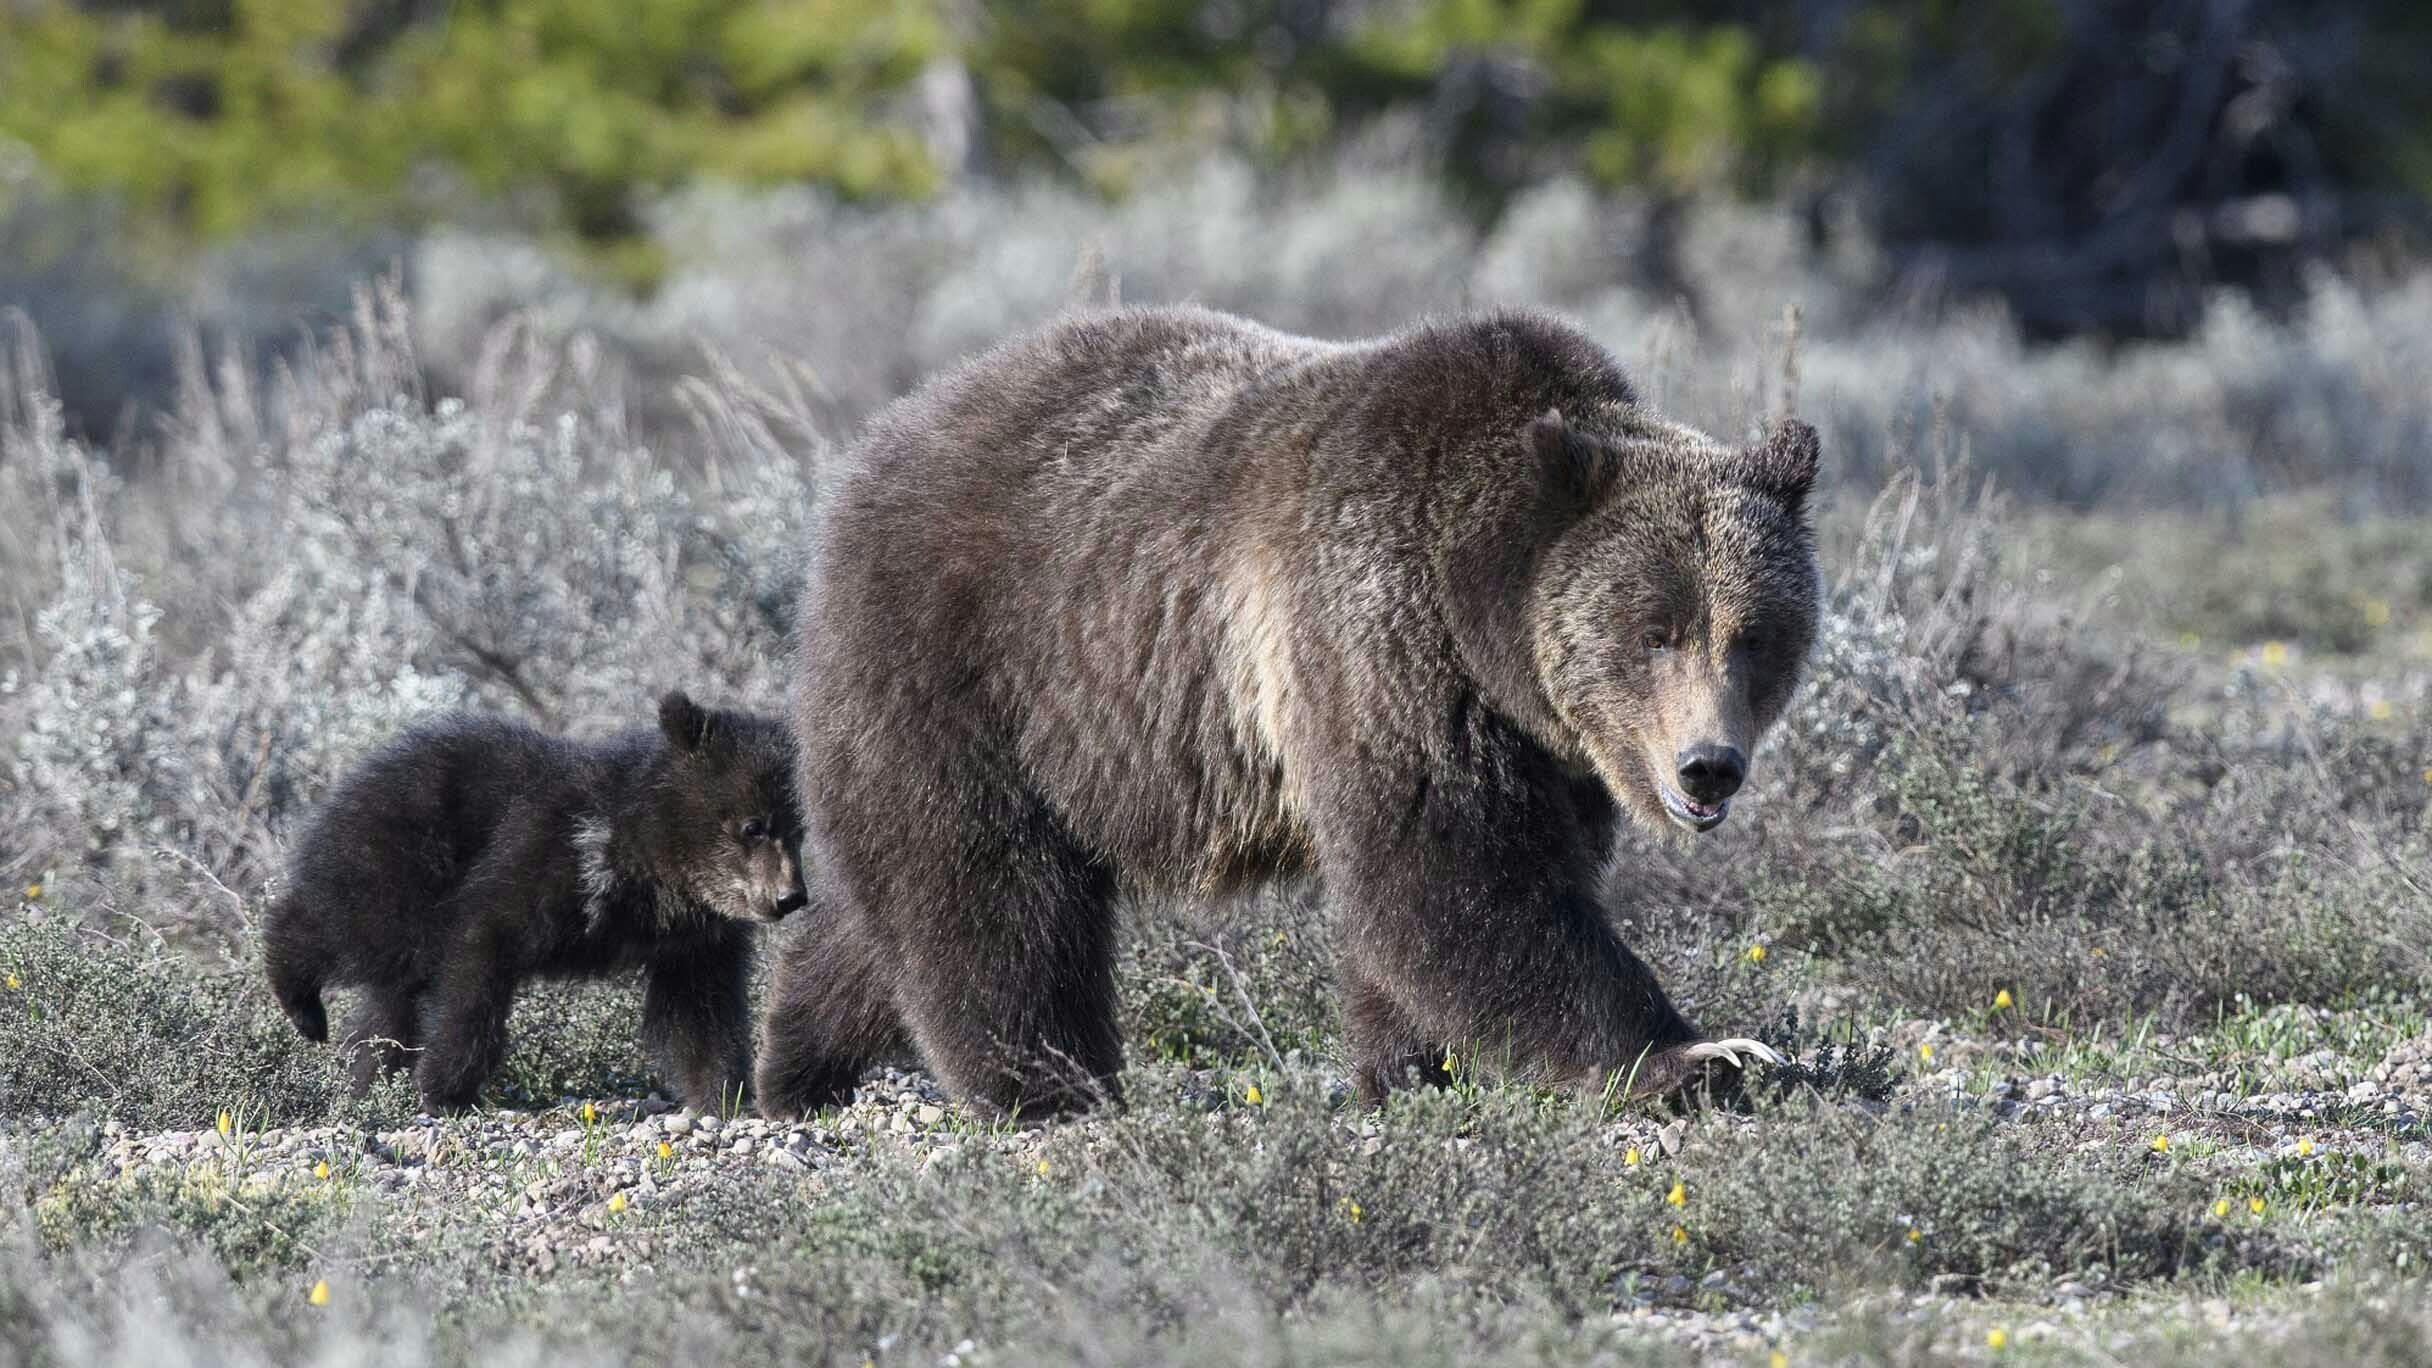 Grizzly 399 and her cub, Spirit. Photo is owned by Jorn Vangoidtsenhoven and may not be reproduced